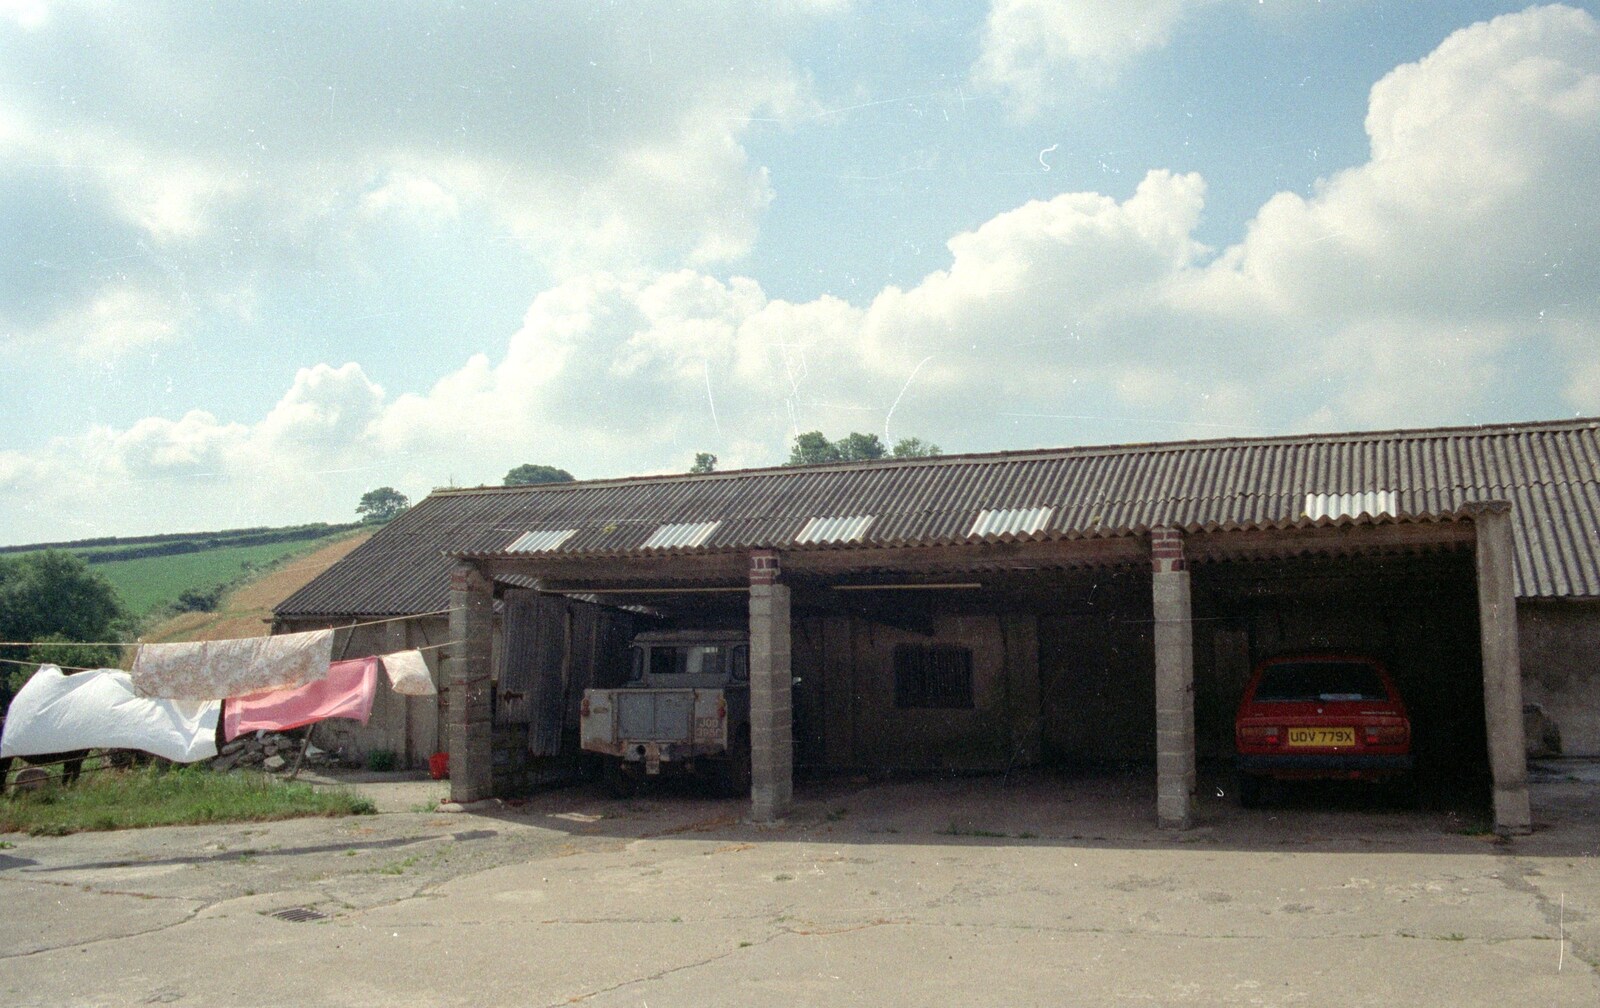 Pitt Farm garages from Uni: A Trip to the Riviera and Oberon Gets New Shoes, Torquay and Harbertonford, Devon - 3rd July 1989